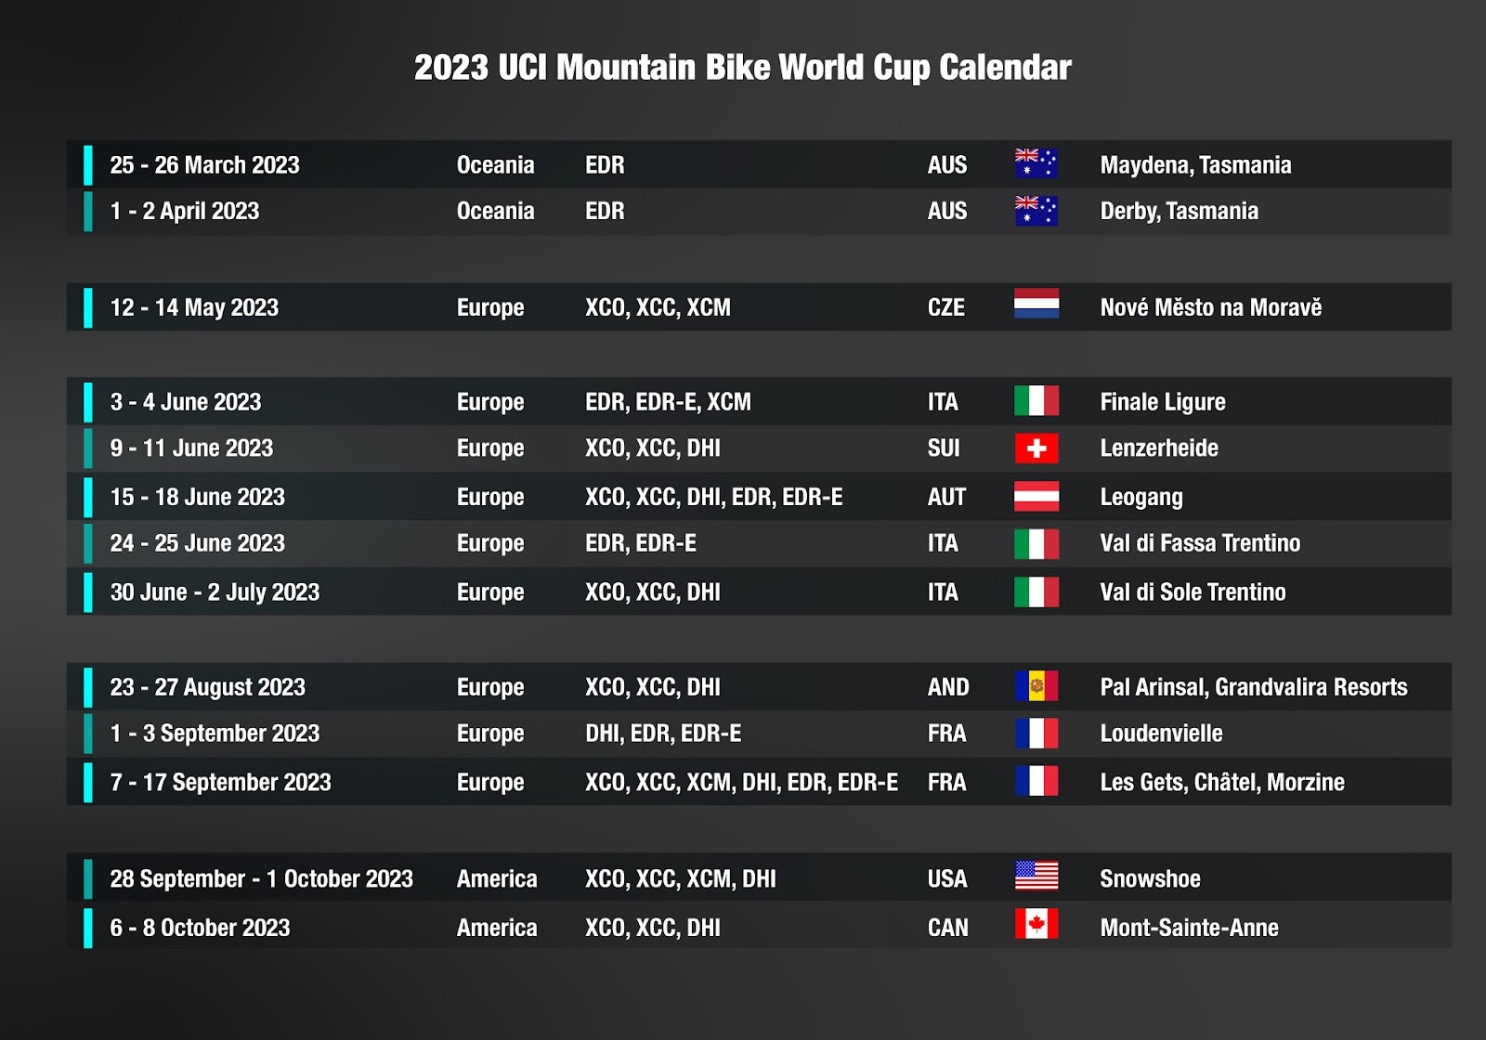 mtb-calendar-2023-dates-and-venues-for-uci-world-cup-and-world-championships